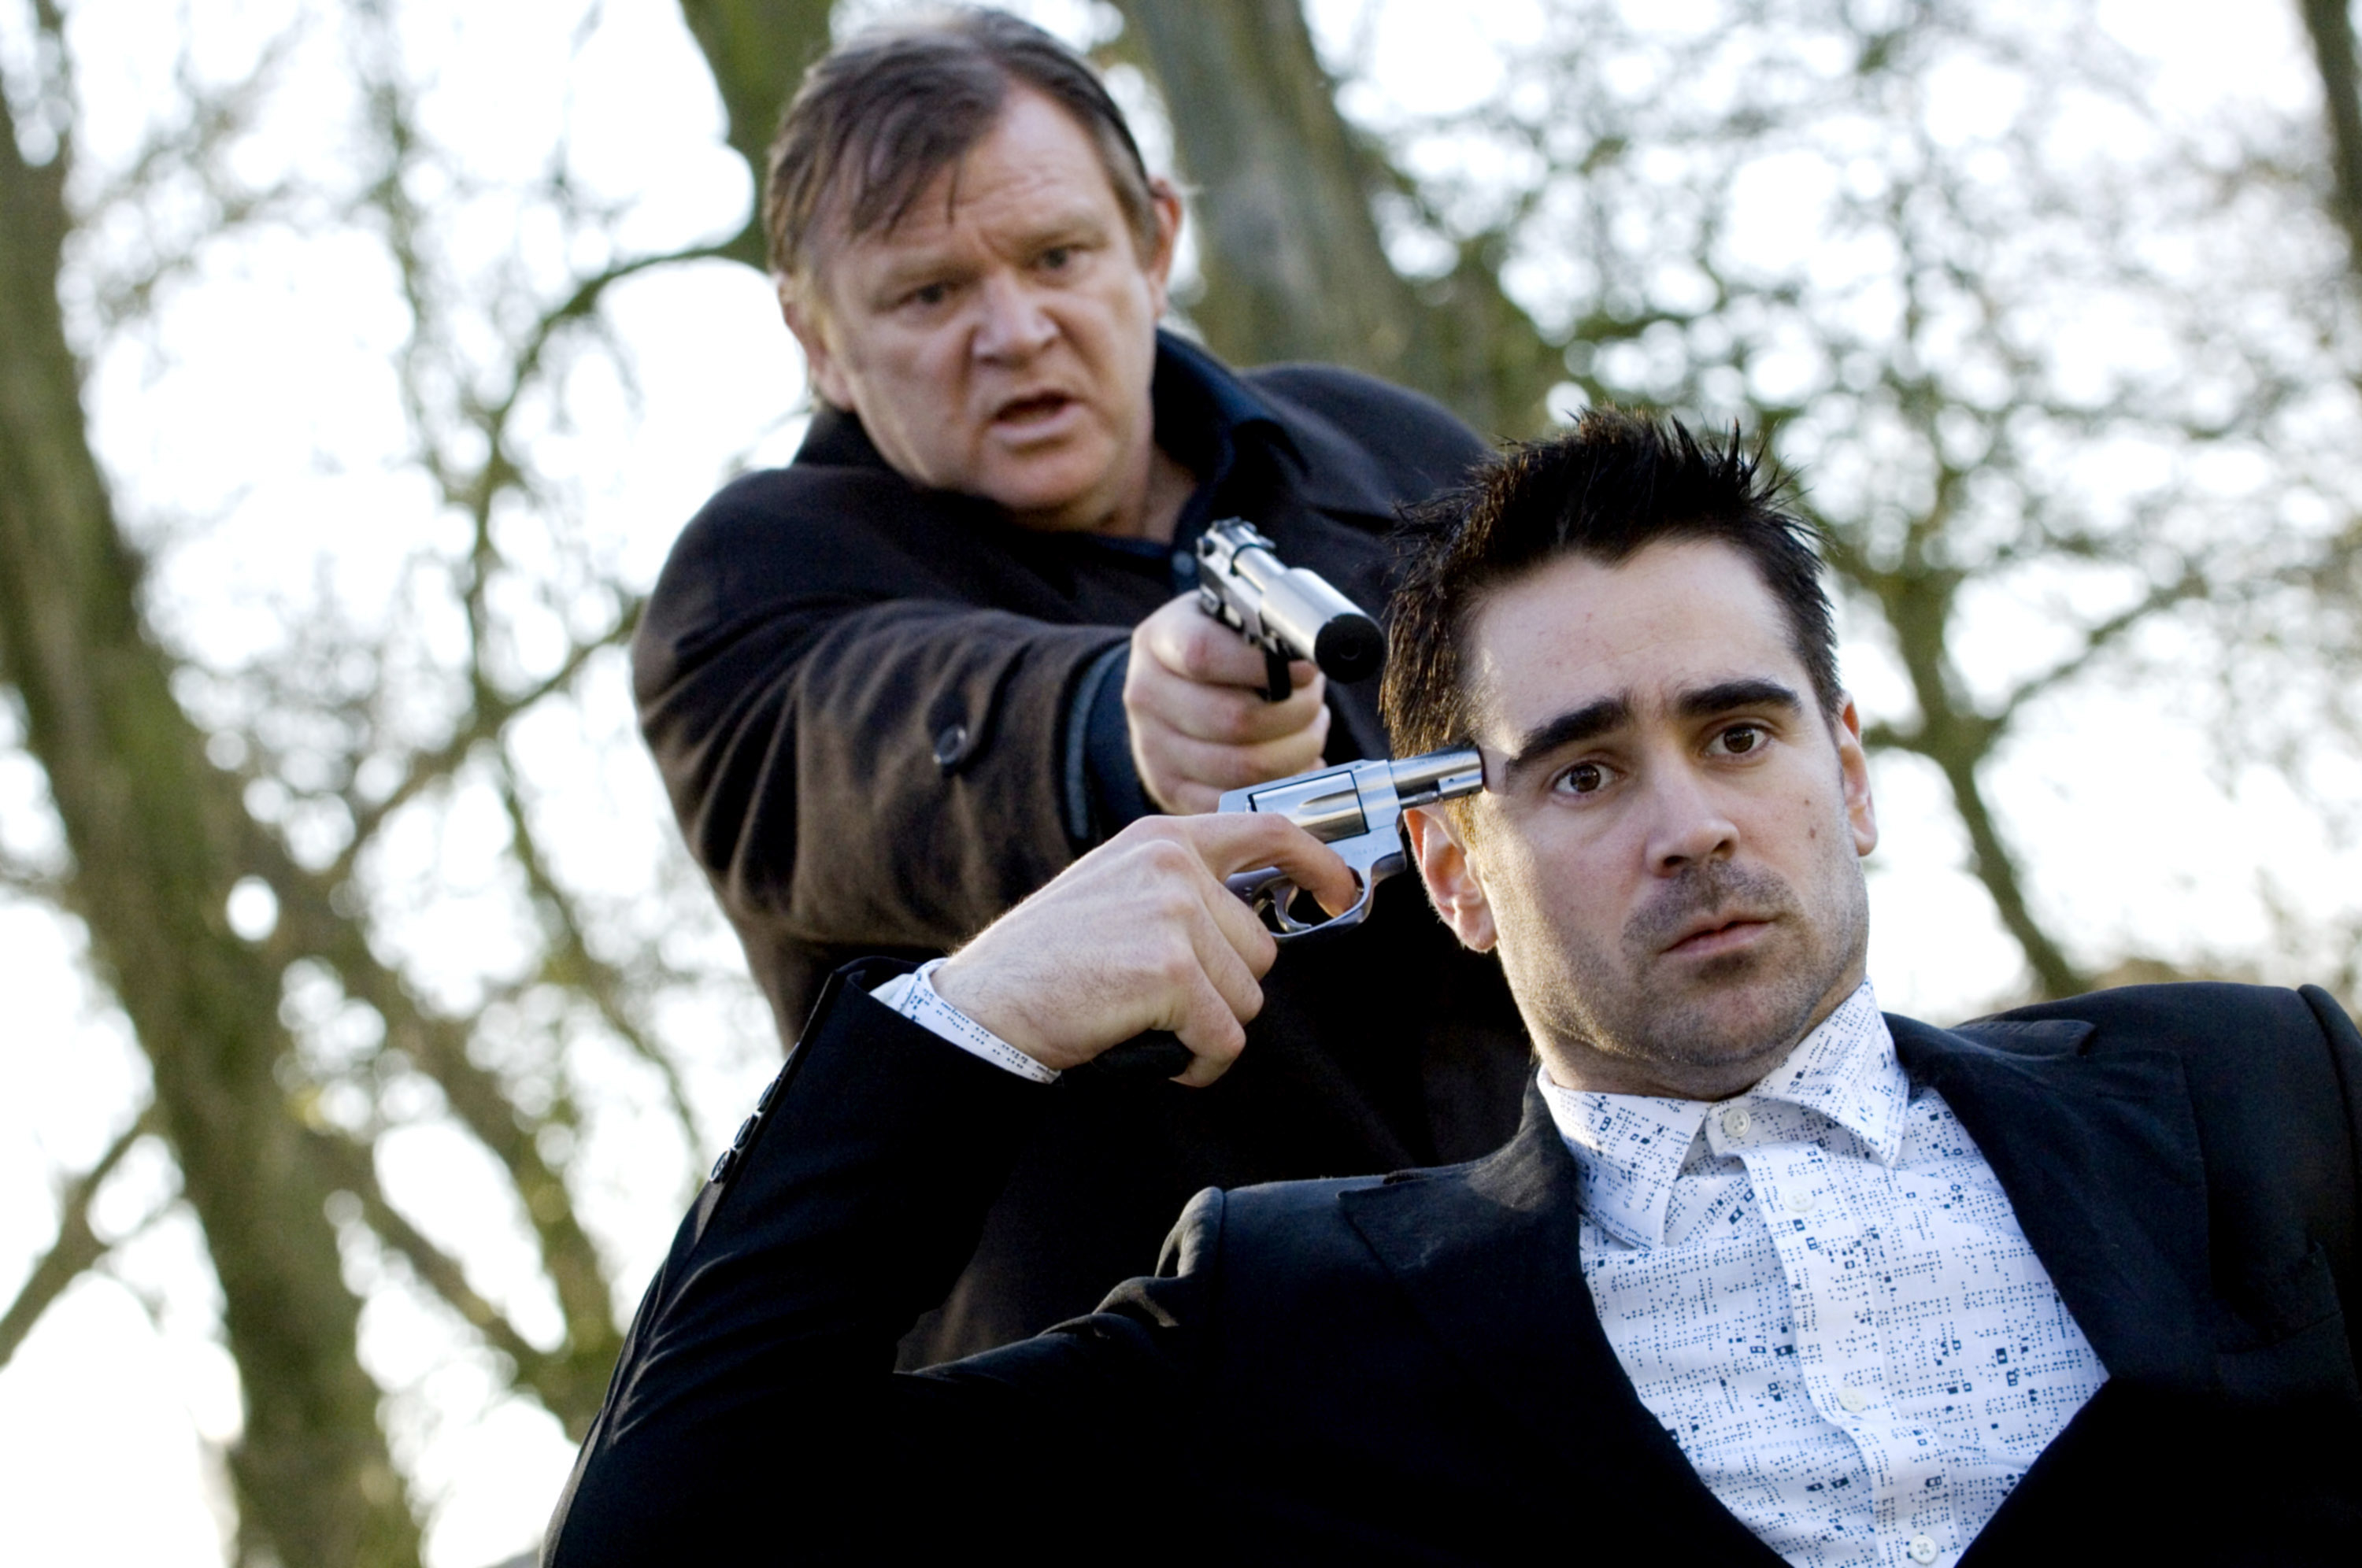 Two actors in a tense scene with one holding a gun to the other&#x27;s head, outdoors with trees in the background